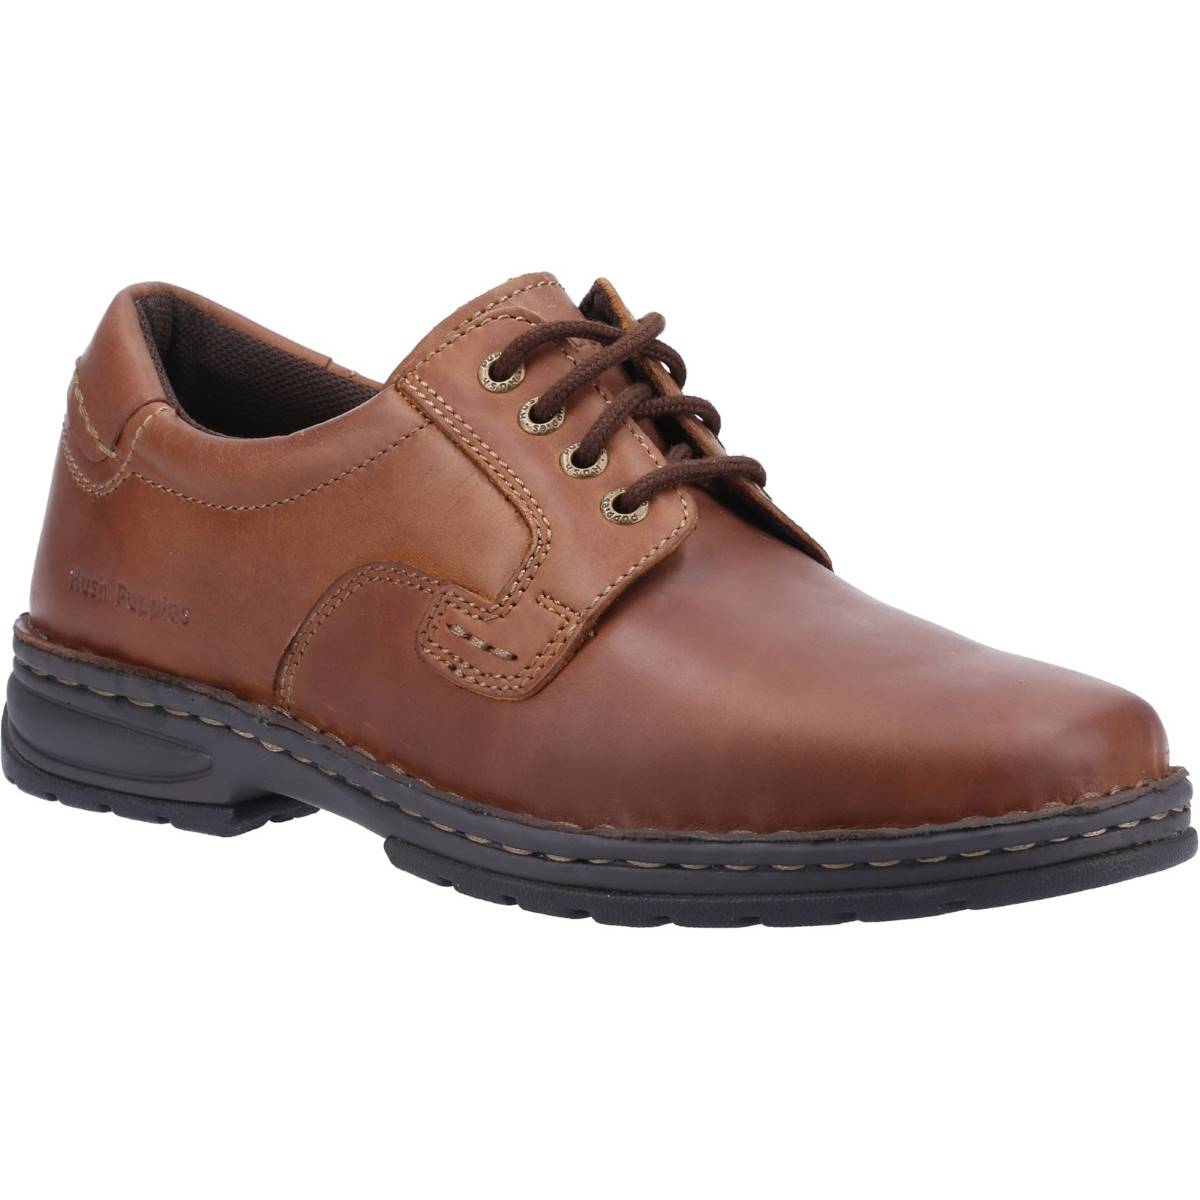 Hush Puppies Outlaw Ii Brown Mens comfort shoes HPM2000-61-2 in a Plain Leather in Size 12